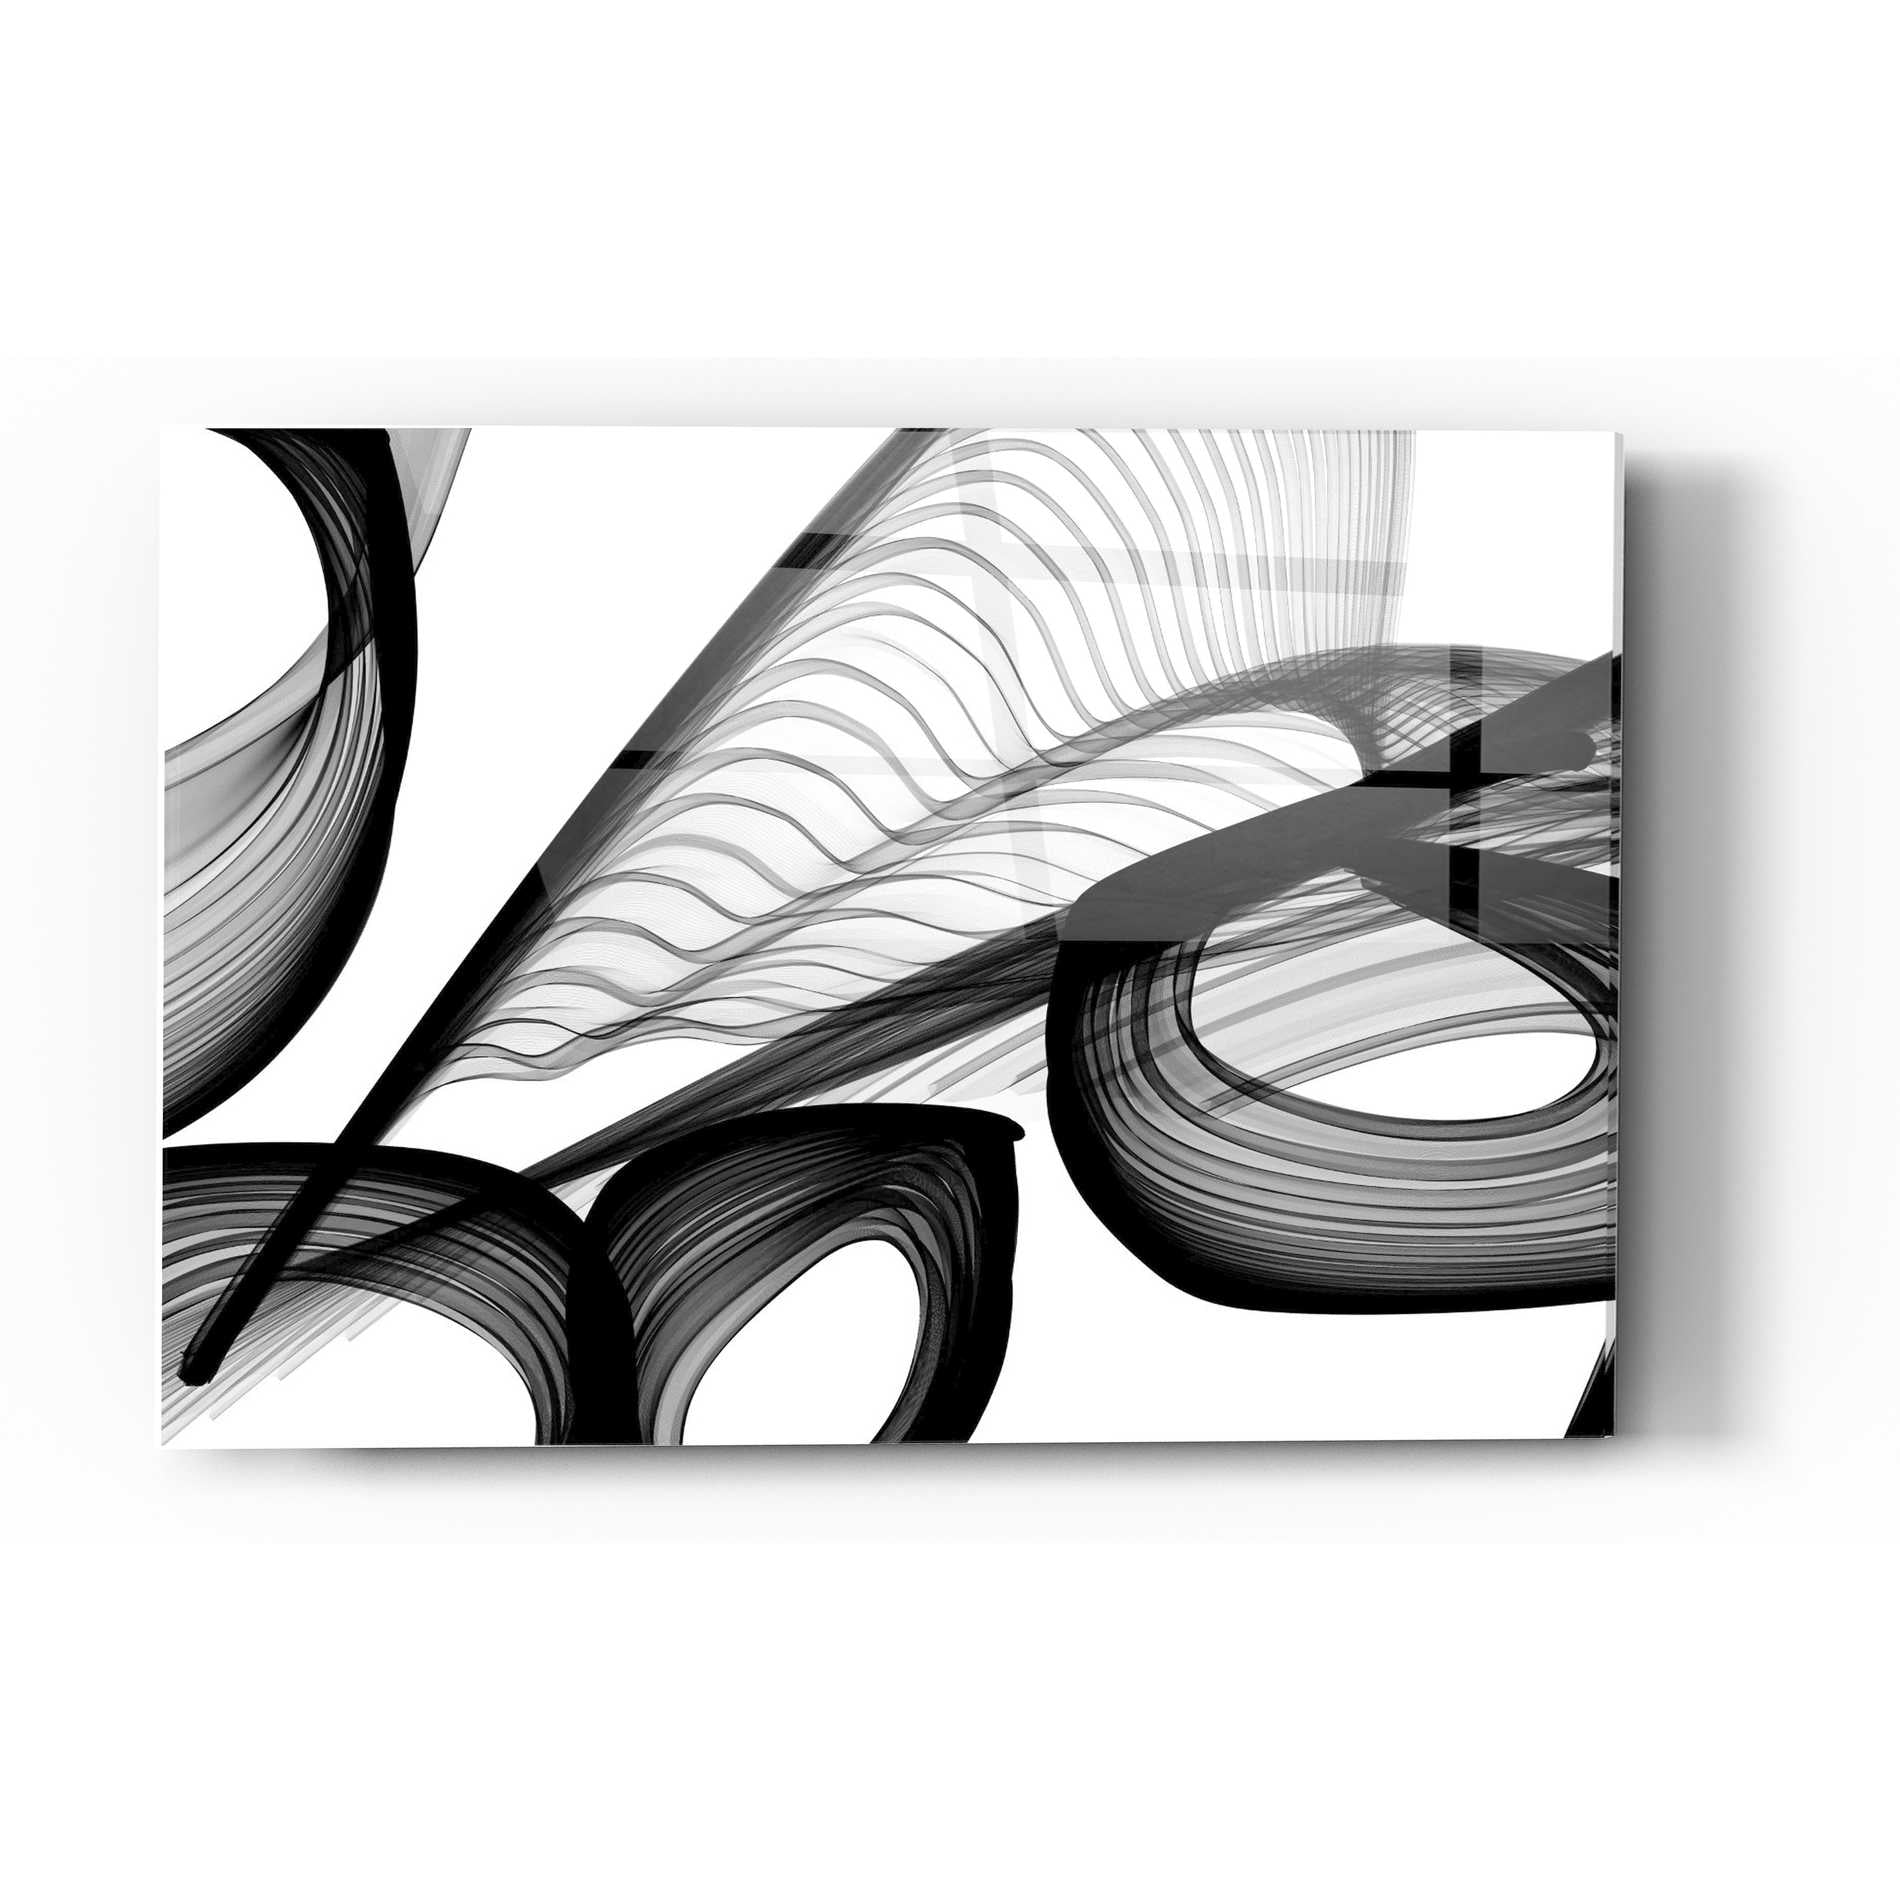 Epic Art 'Abstract Black and White 22-21' by Irena Orlov, Acrylic Glass Wall Art,16x24